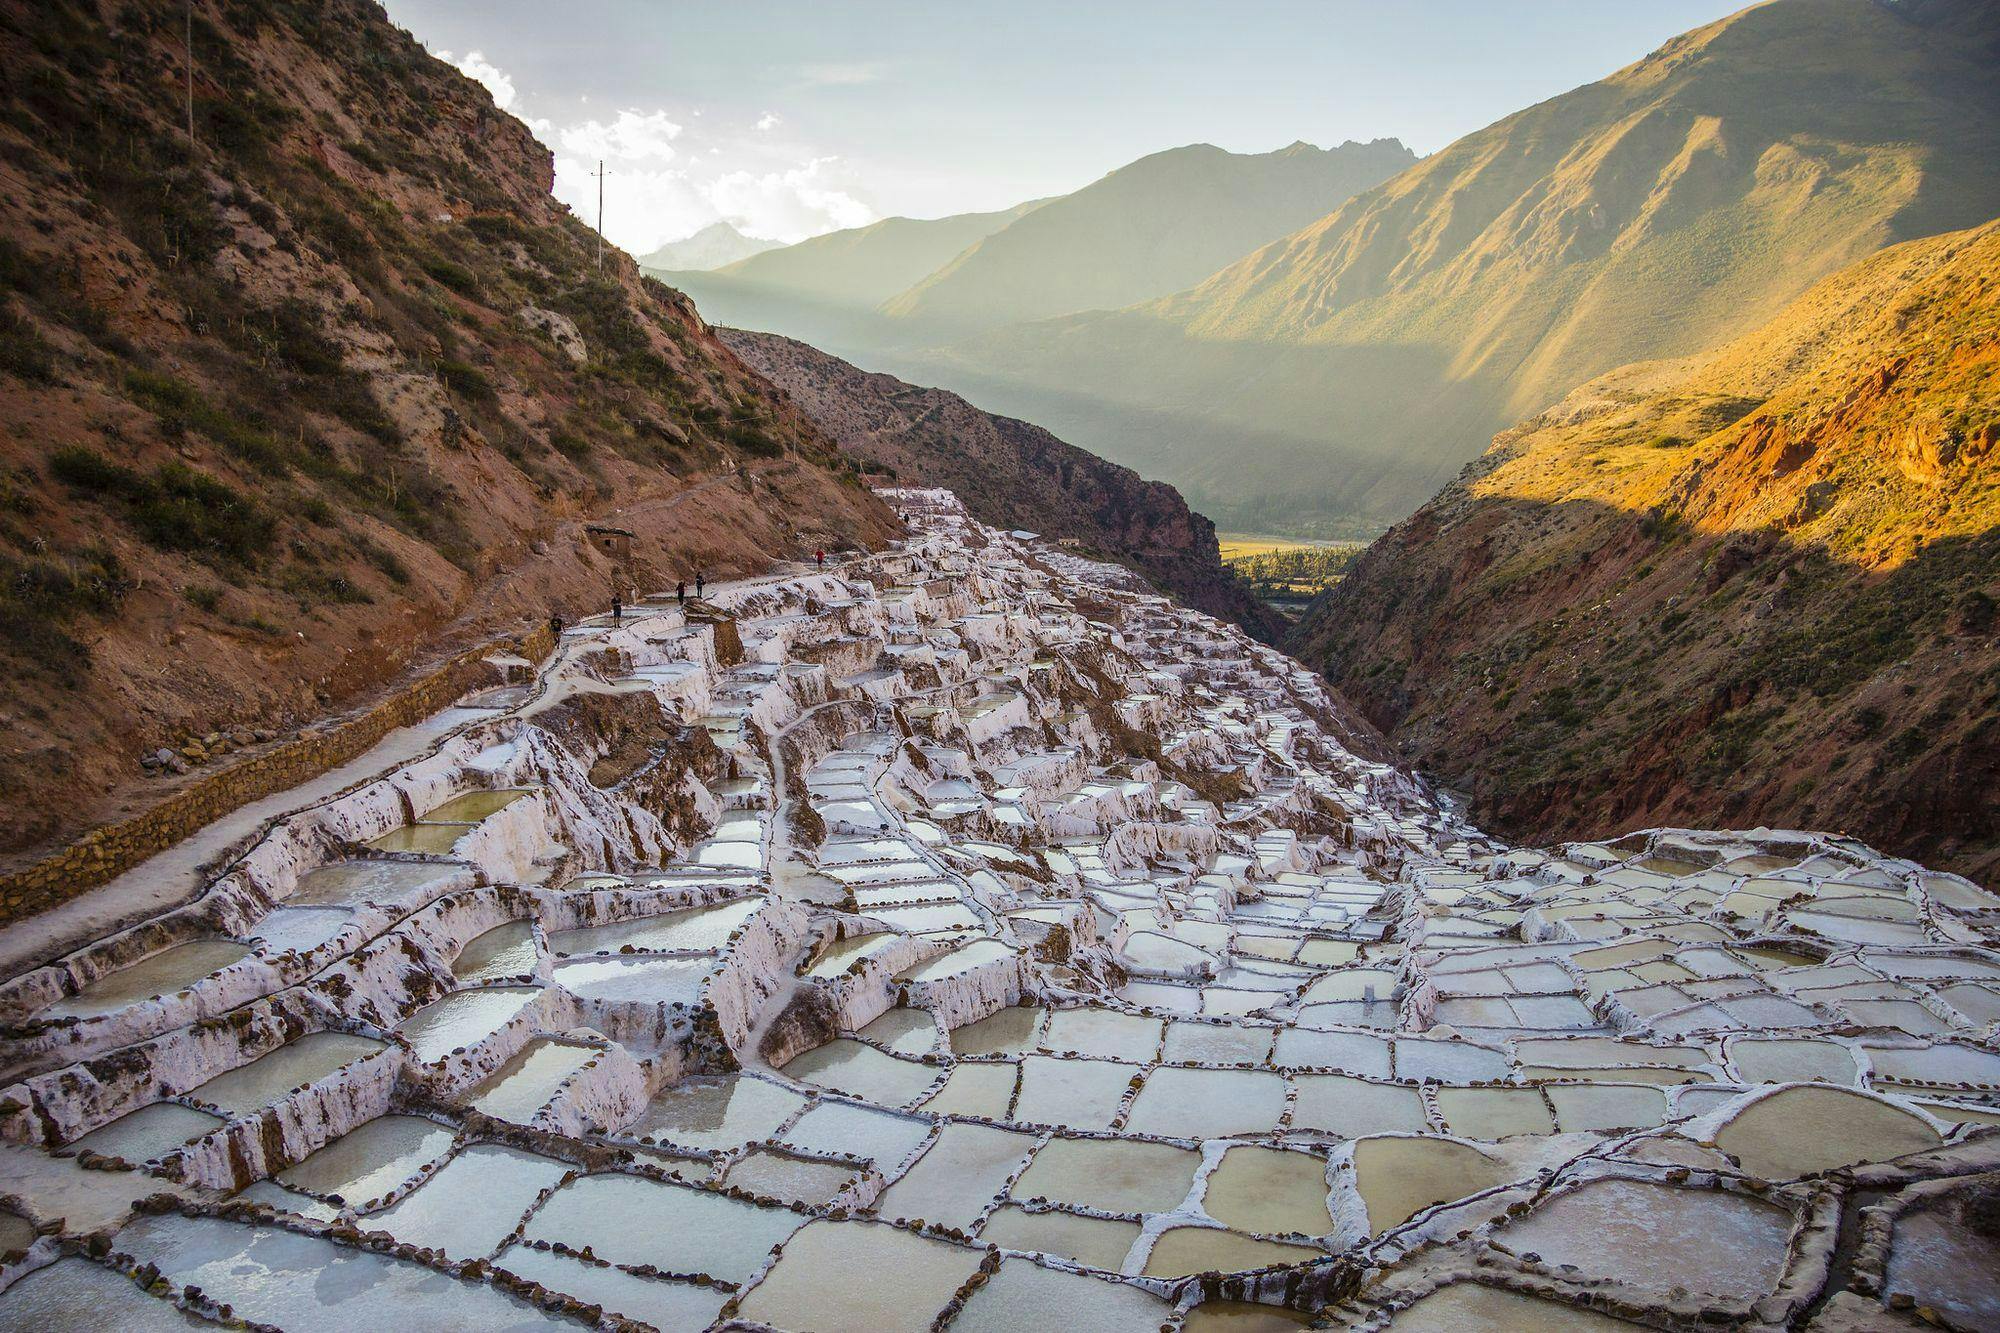 Maras Moray & Salineras, Sacred Valley and Machu Picchu in 5 days